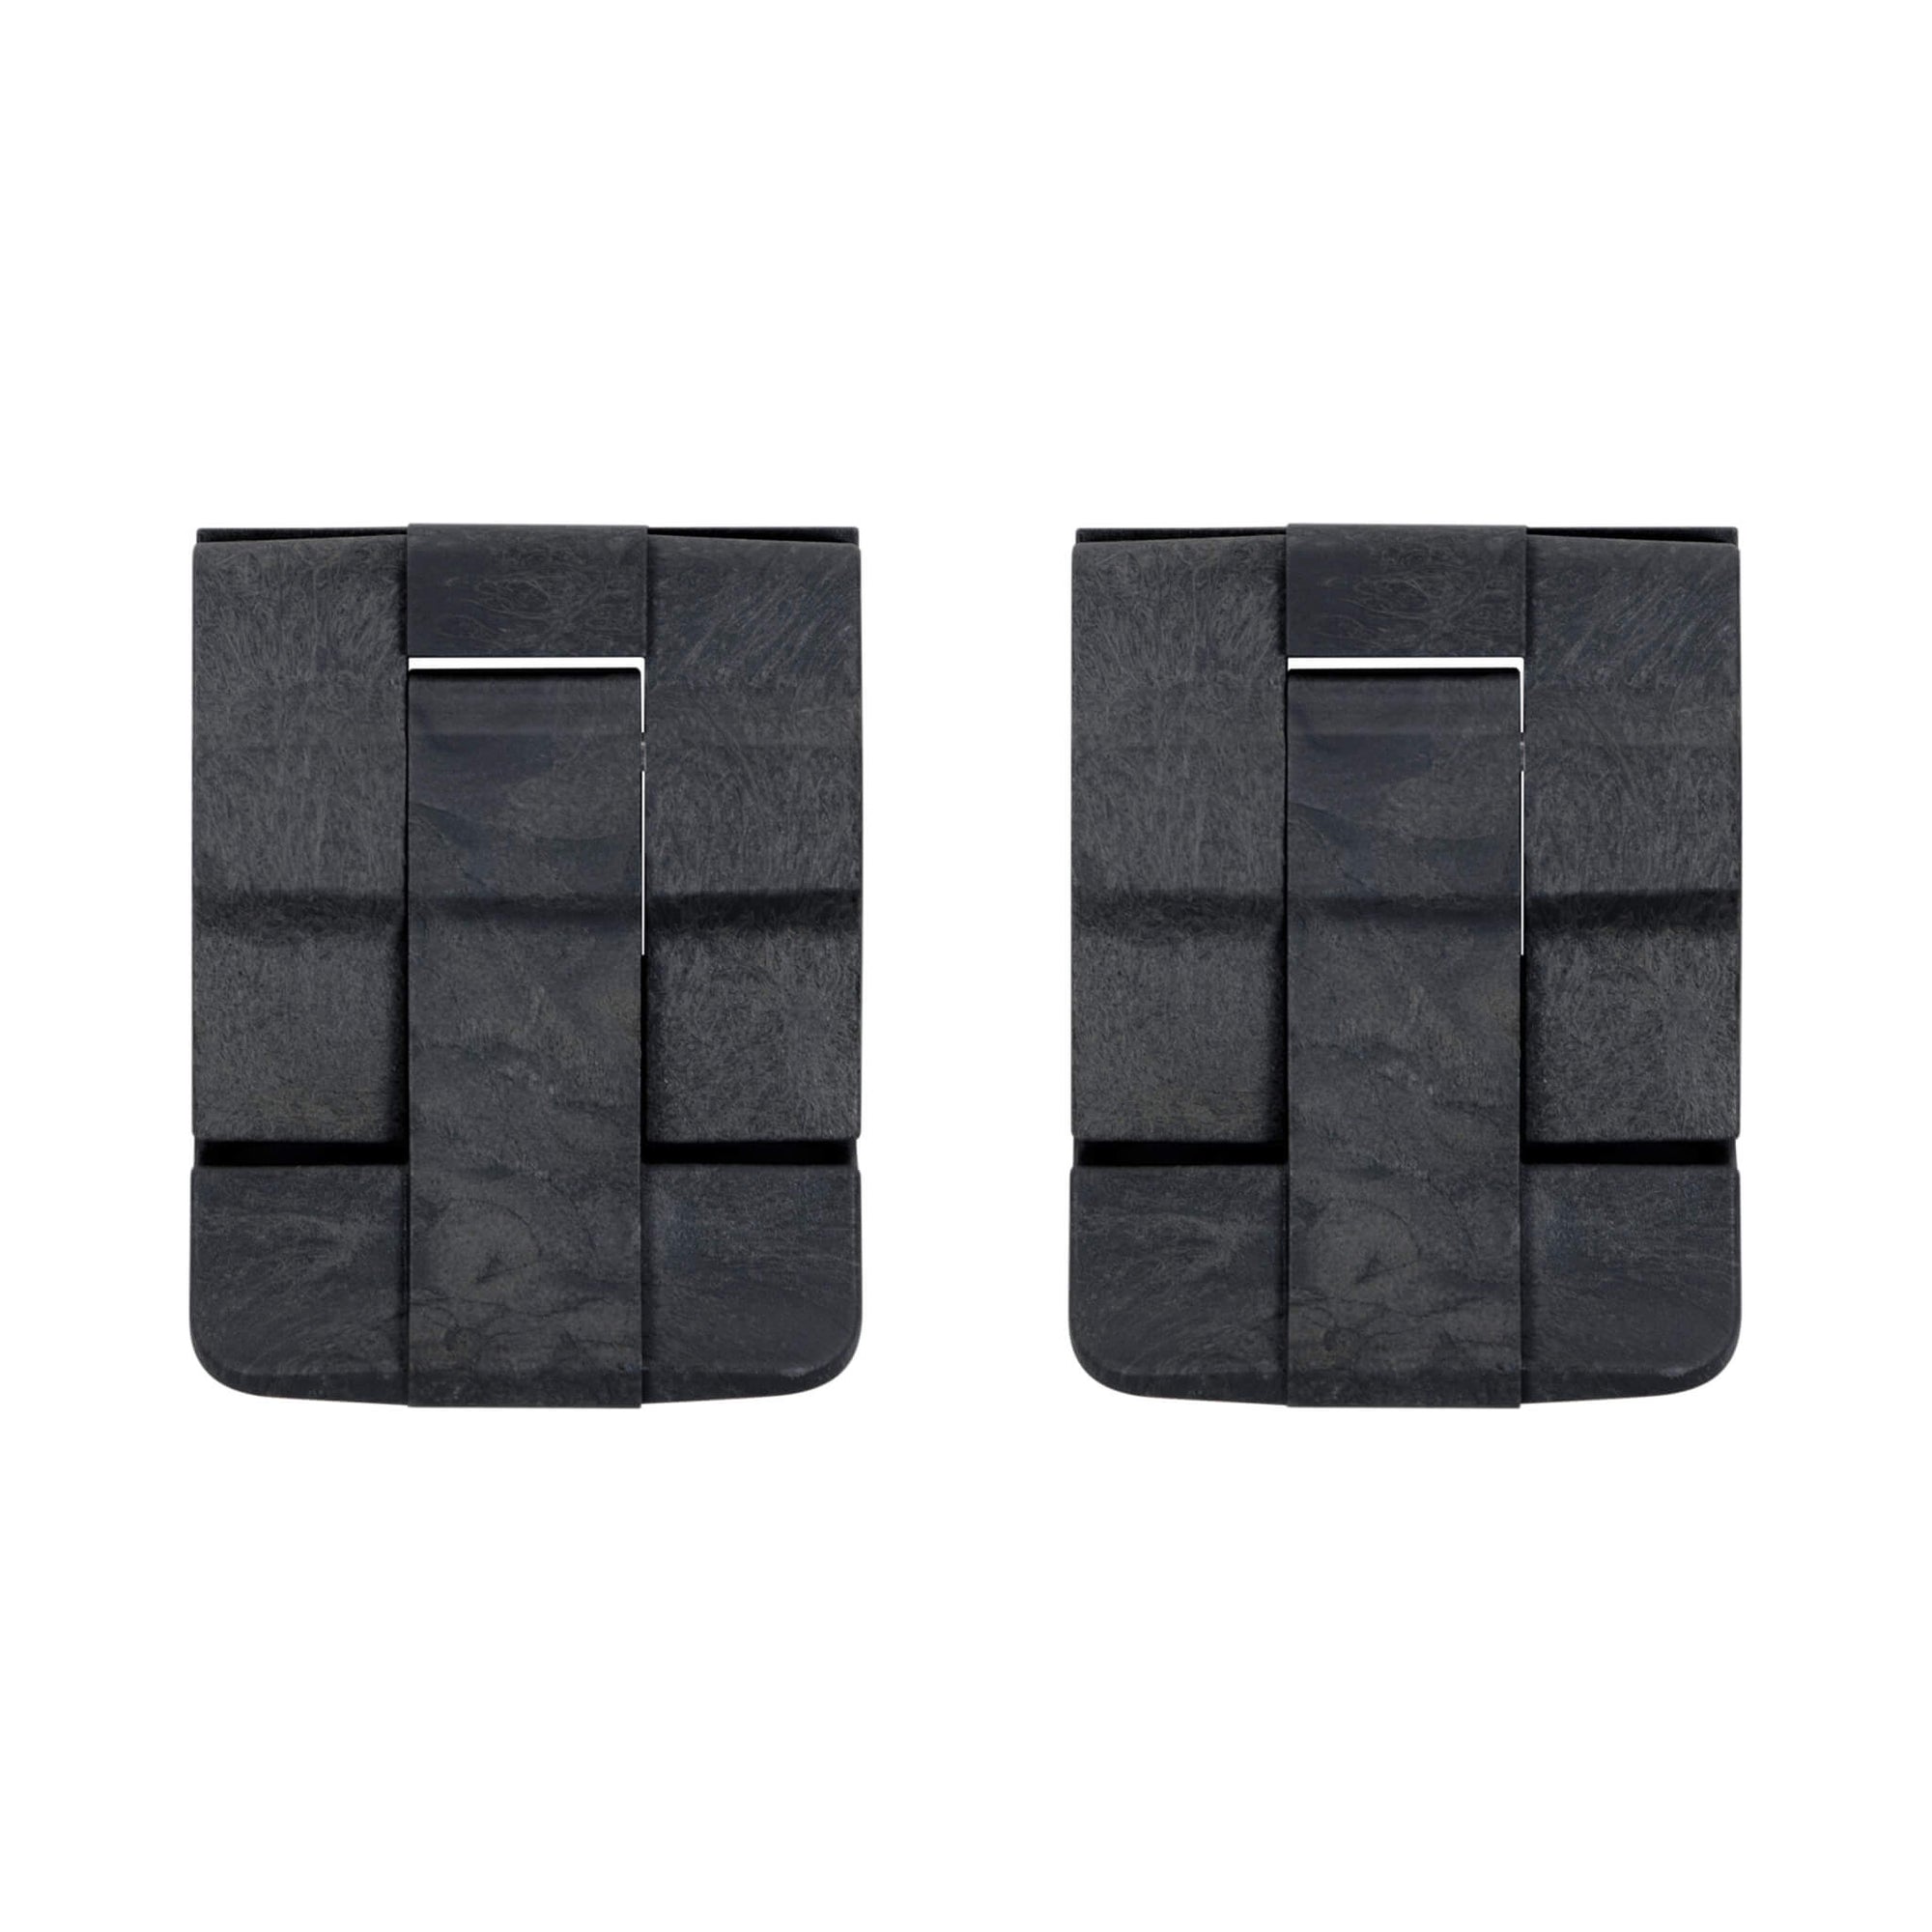 Pelican Replacement Latches, Large, Black, Double-Throw (Set of 2) ColorCase 